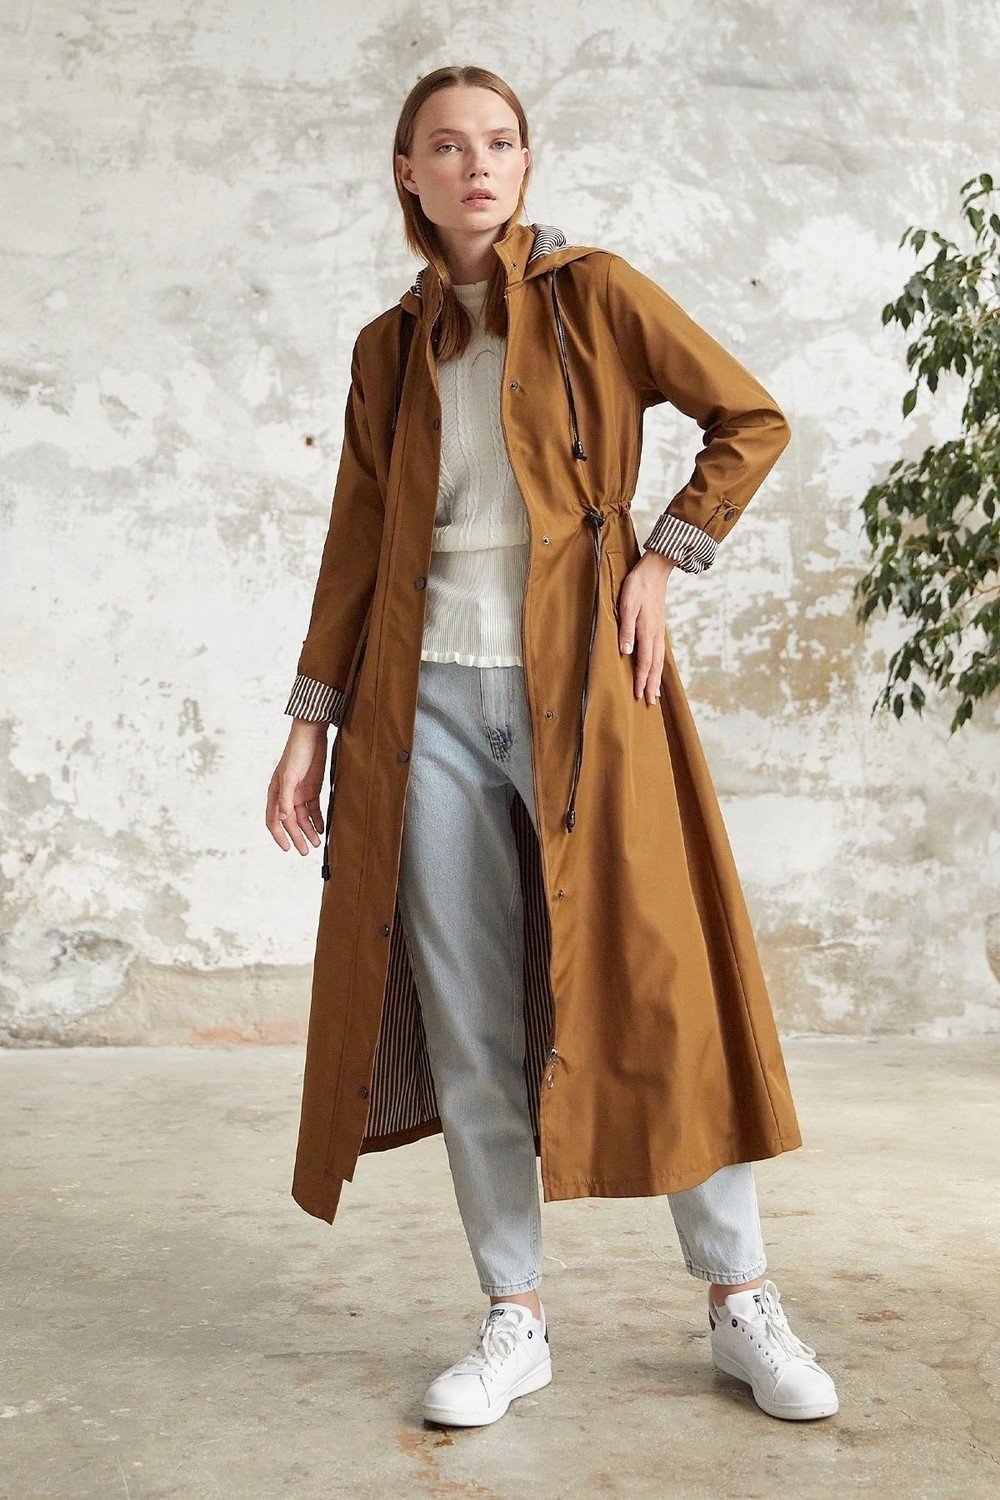 InStyle Lined Patterned Trench Coat - Tan